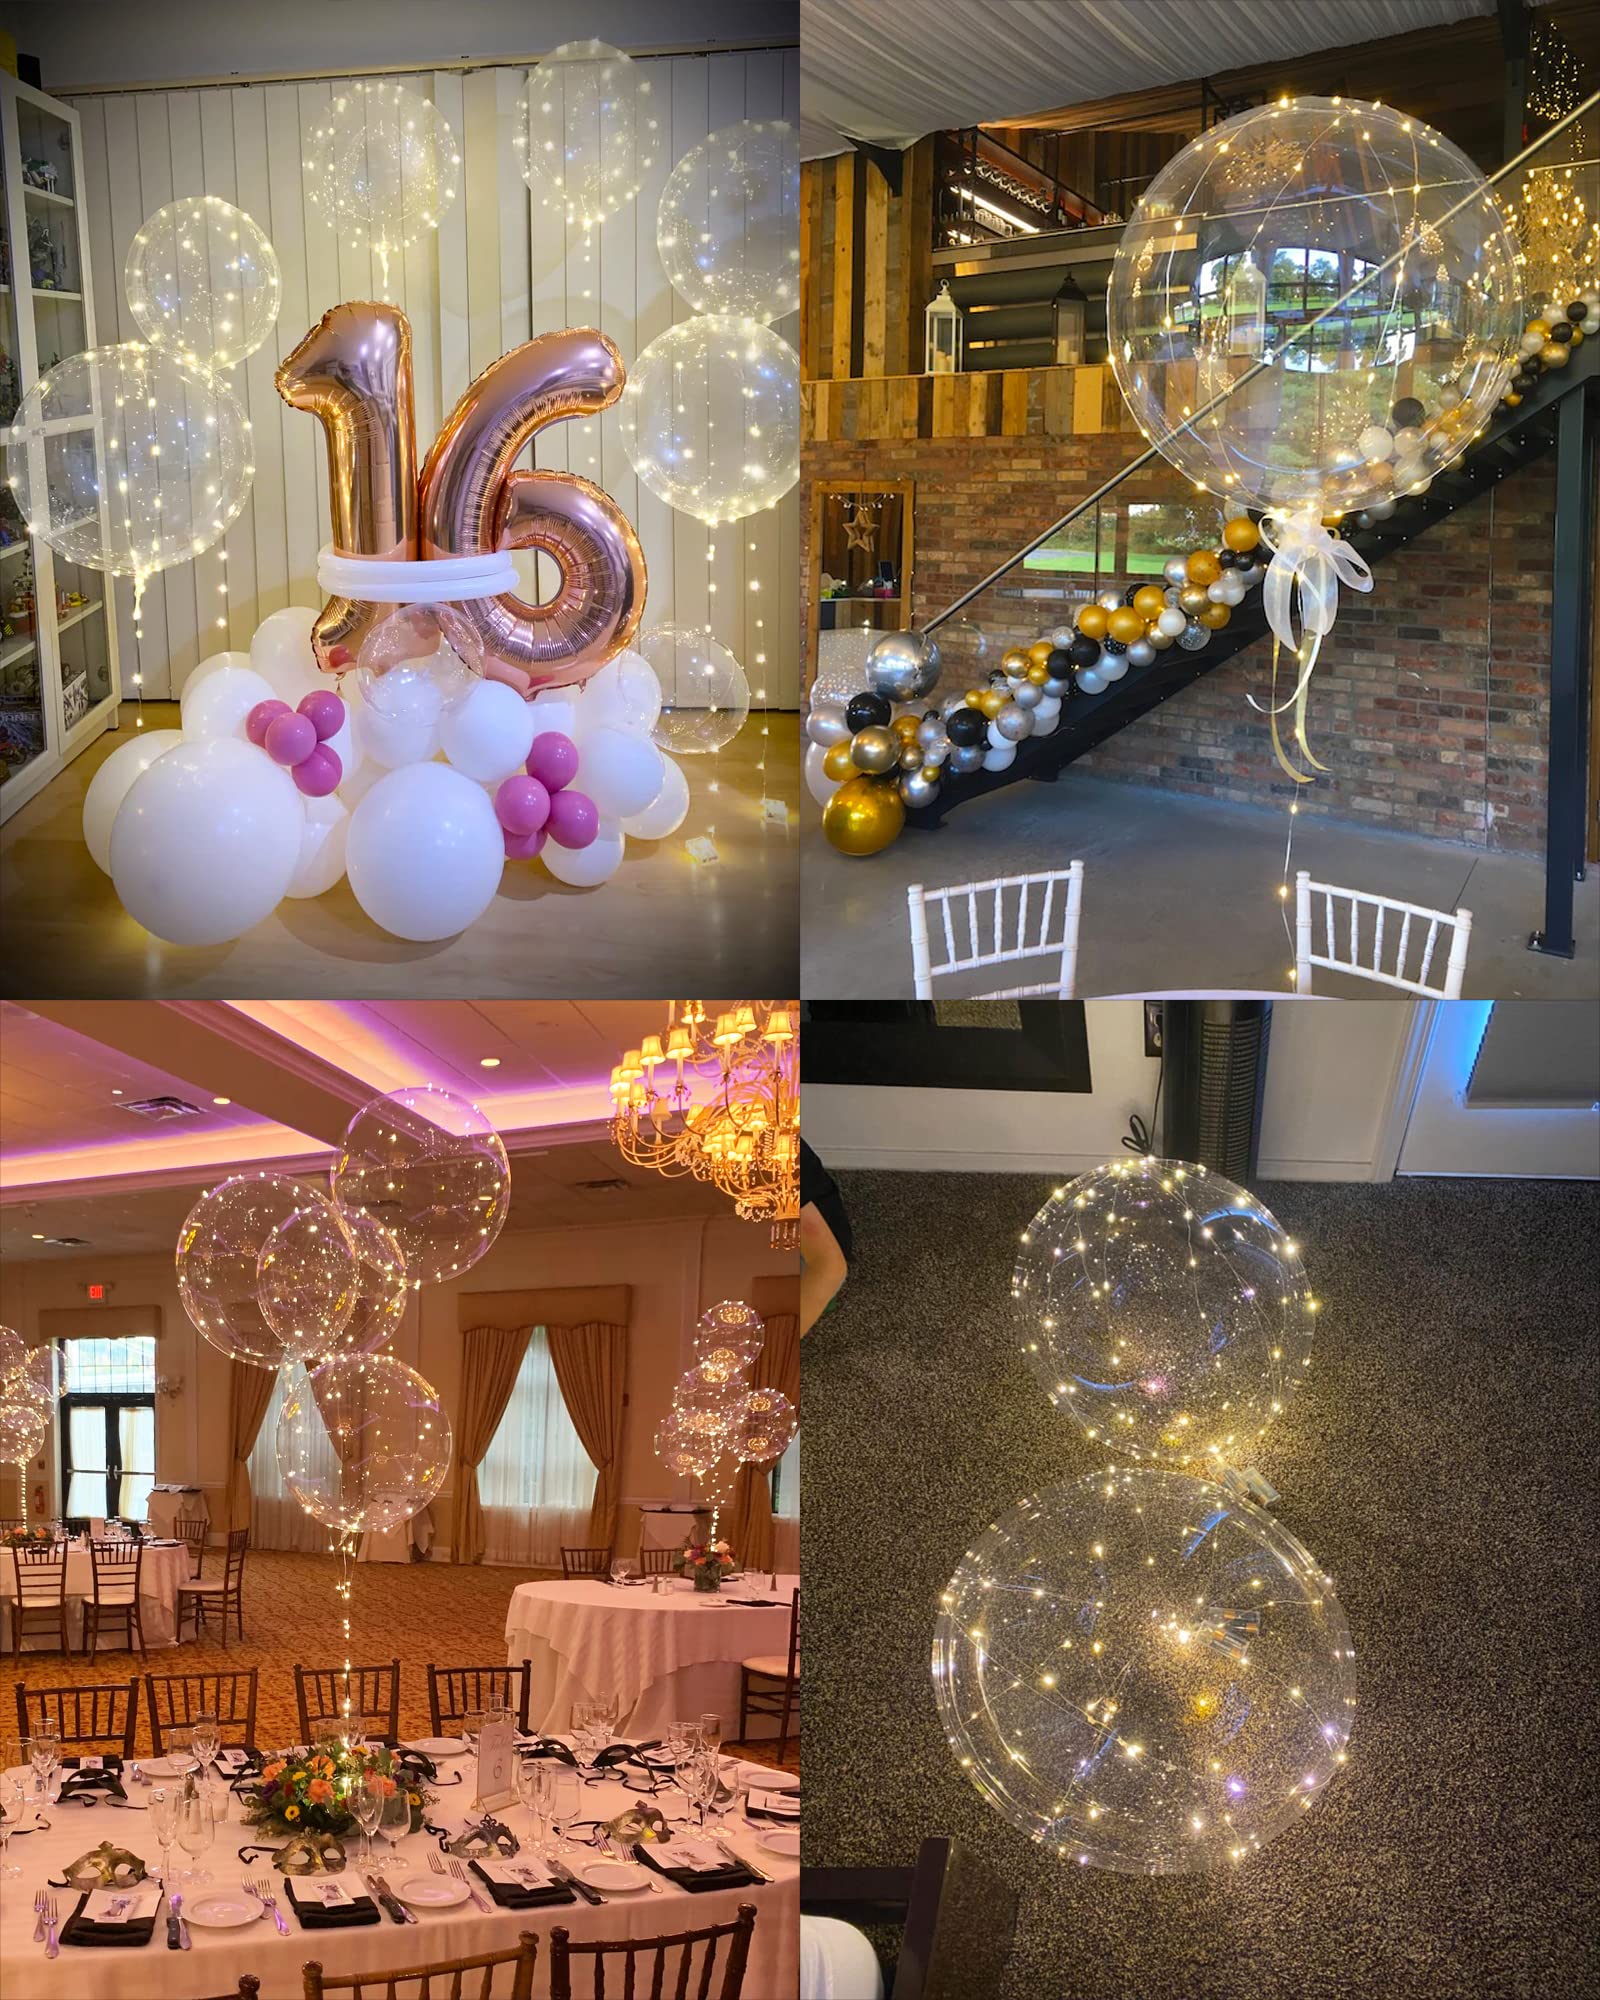 LED Balloons Light Up Balloons - 10 Pack Glow in the Dark Balloons, 20 Inch Clear Bobo Balloons with Lights, Bubble Balloons with String Lights, Helium Glowing Balloons for Party